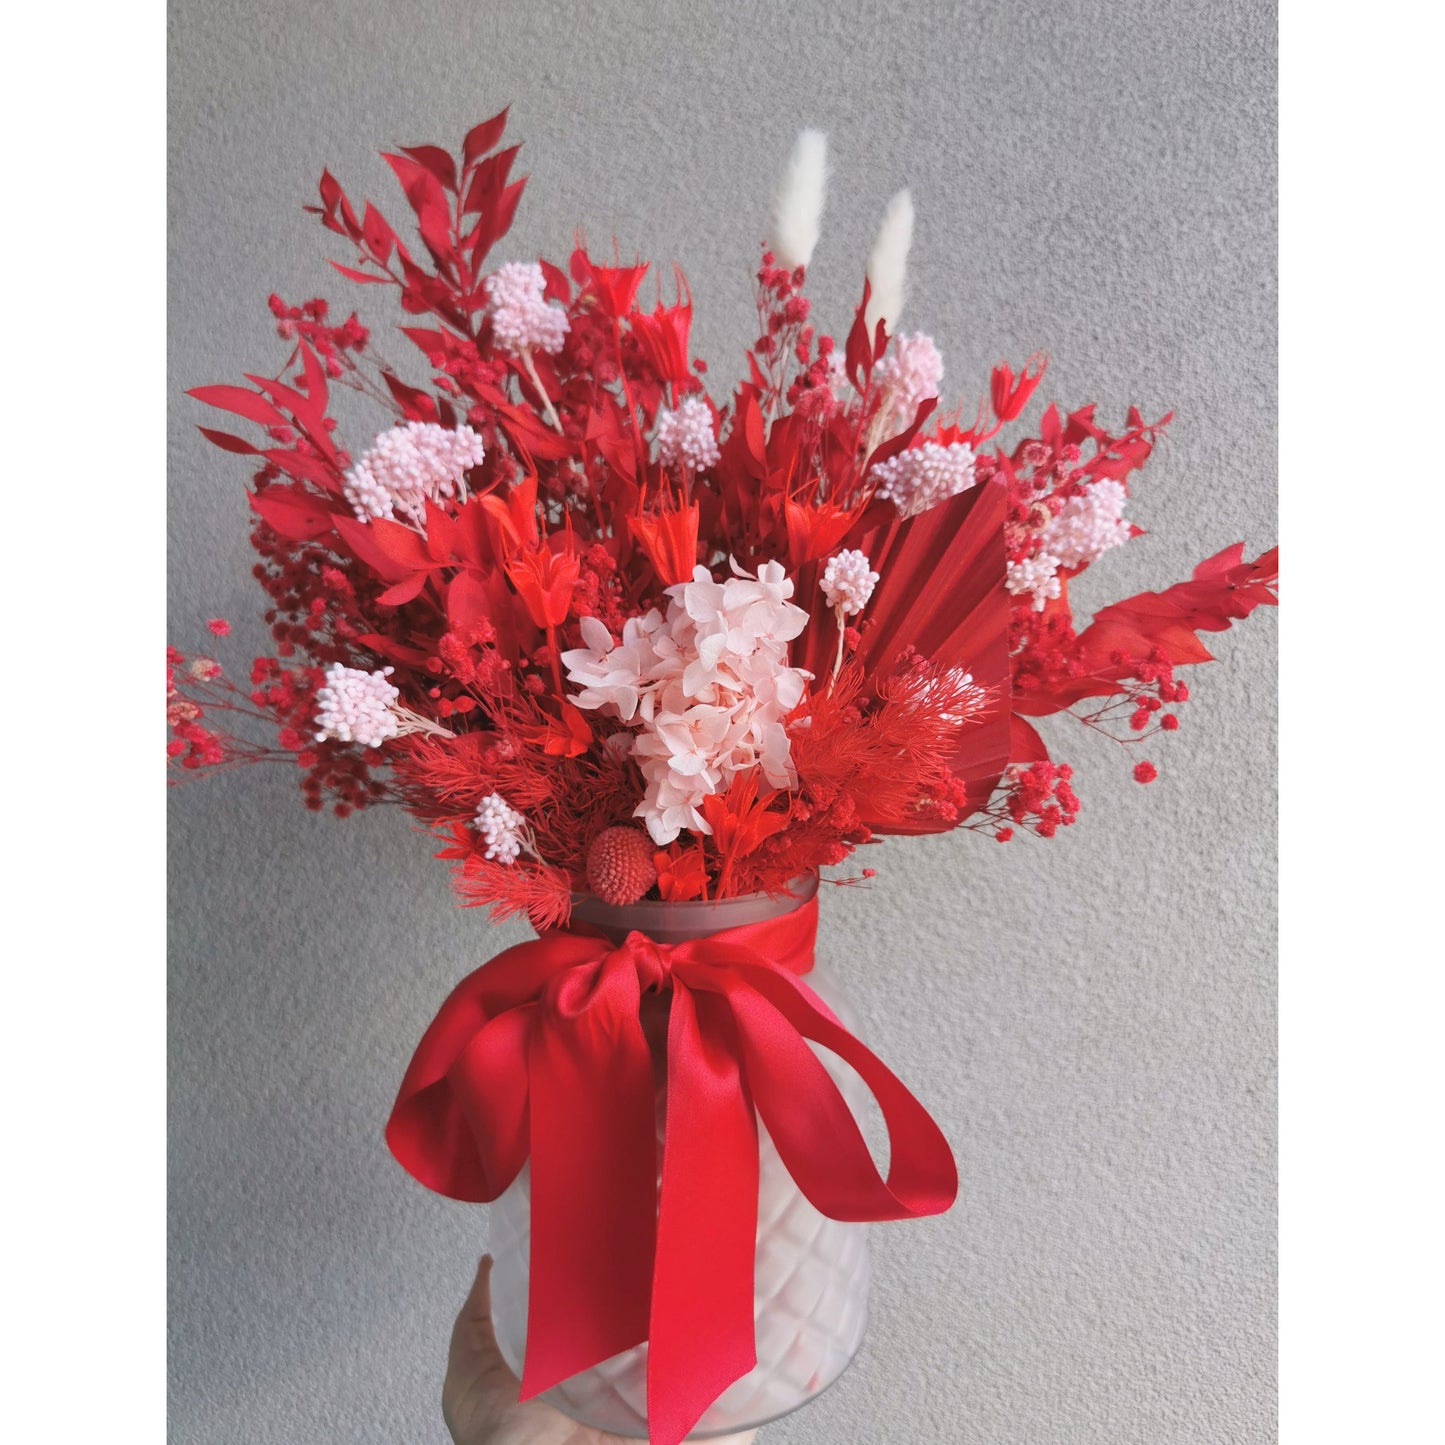 Bunch of Dried & Preserved flowers in red & pink colours and sitting in a frosted glass vase. Photo shows arrangement being held by hand against a blank wall